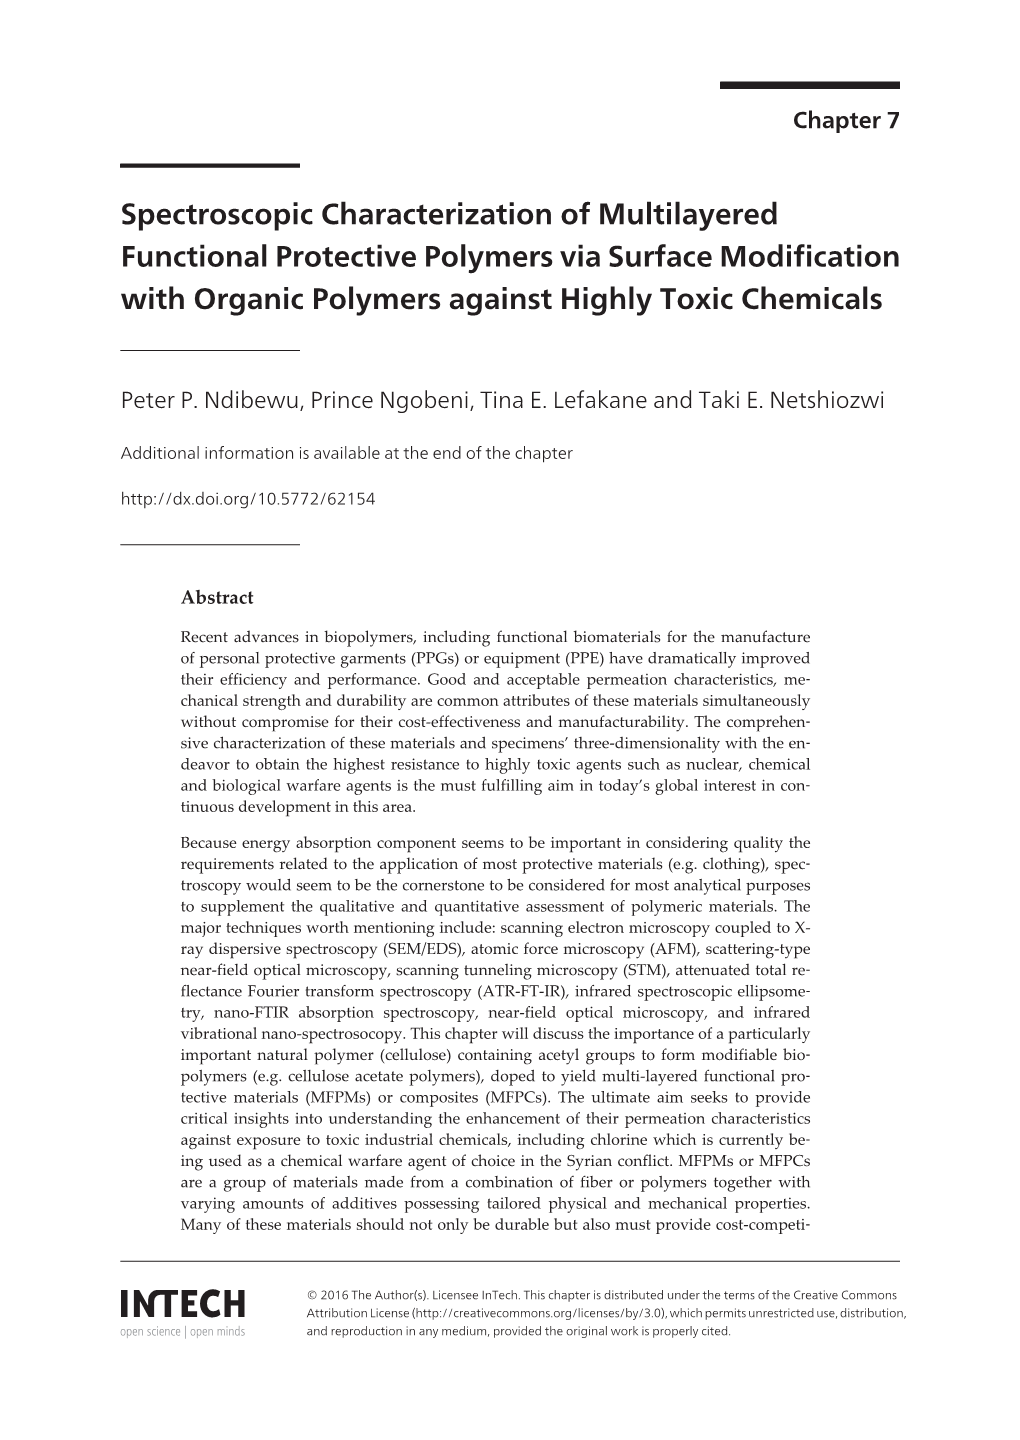 Spectroscopic Characterization of Multilayered Functional Protective Polymers Via Surface Modification with Organic Polymers Against Highly Toxic Chemicals